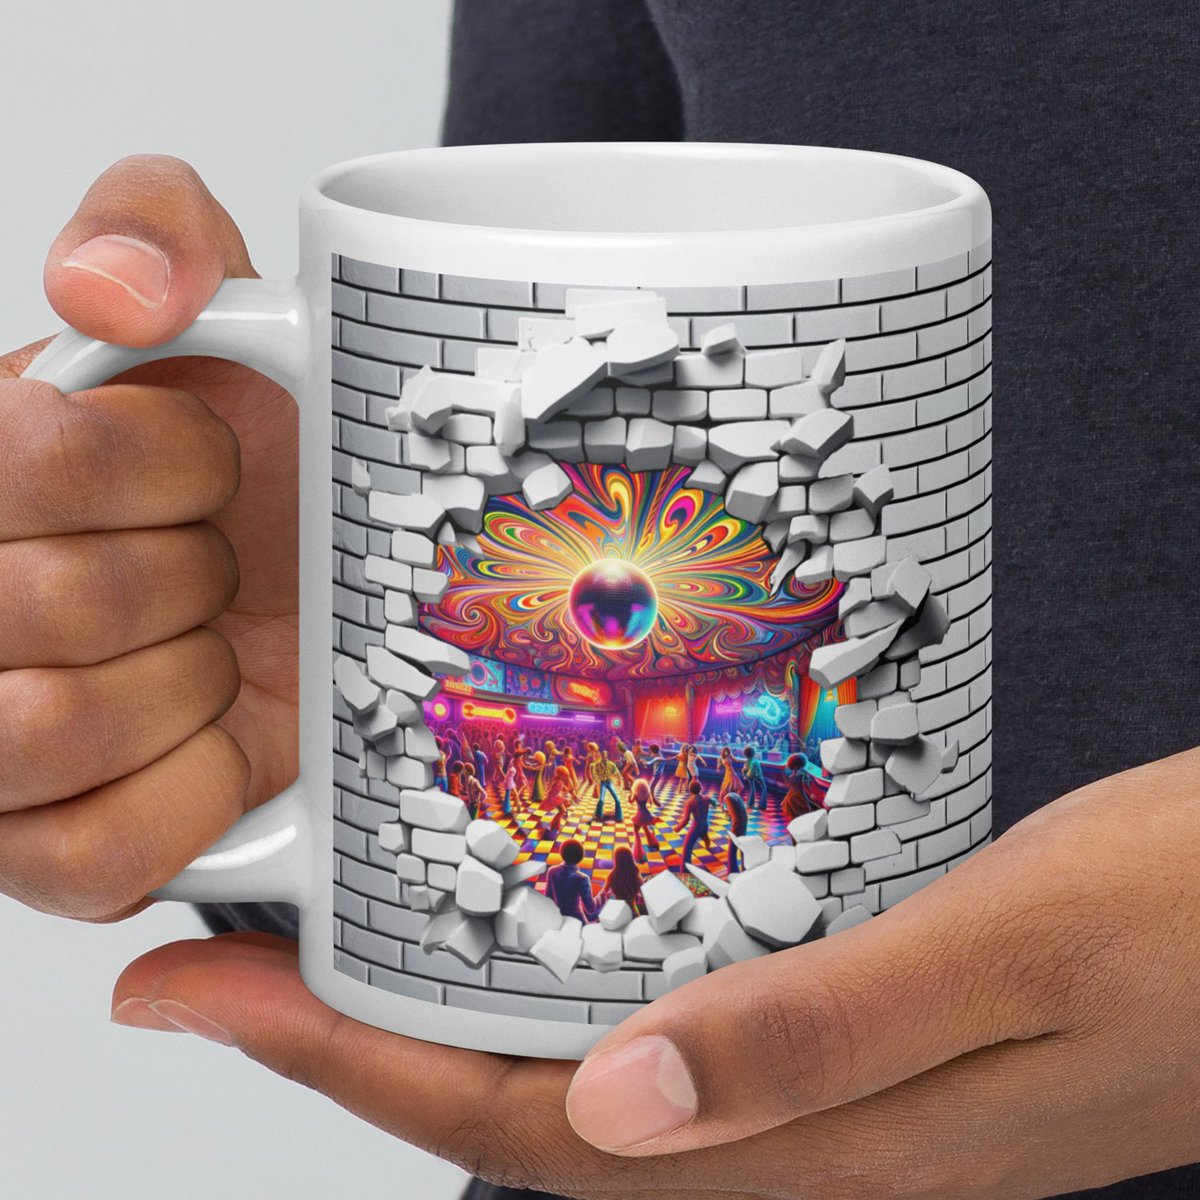 Start your day with a splash of color and a groove! ☕🕺 Our Retro Disco Mug features a vibrant 70's disco club design. Perfect for those who love funky mornings! #RetroMug #70sDisco #MorningGroove
shhcreations.com/products/retro…